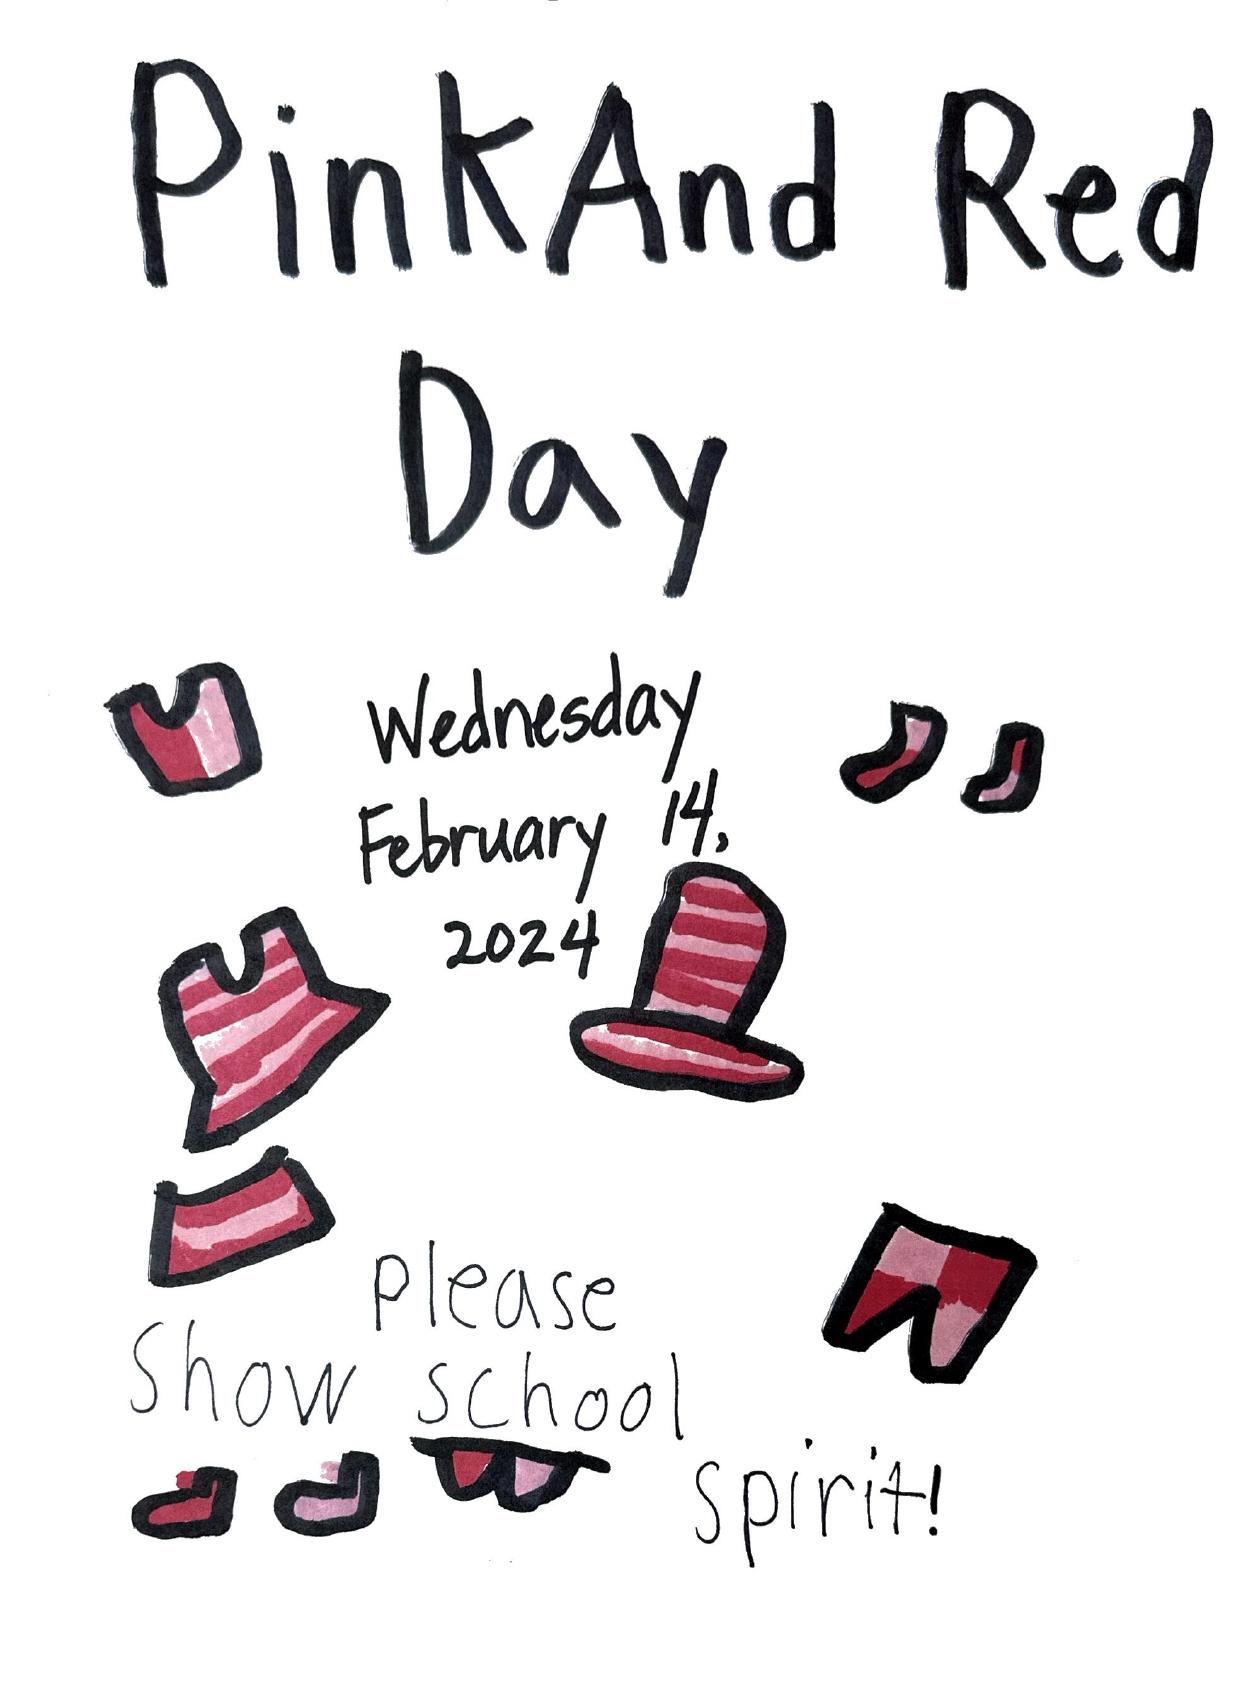 Red and Pink Day 